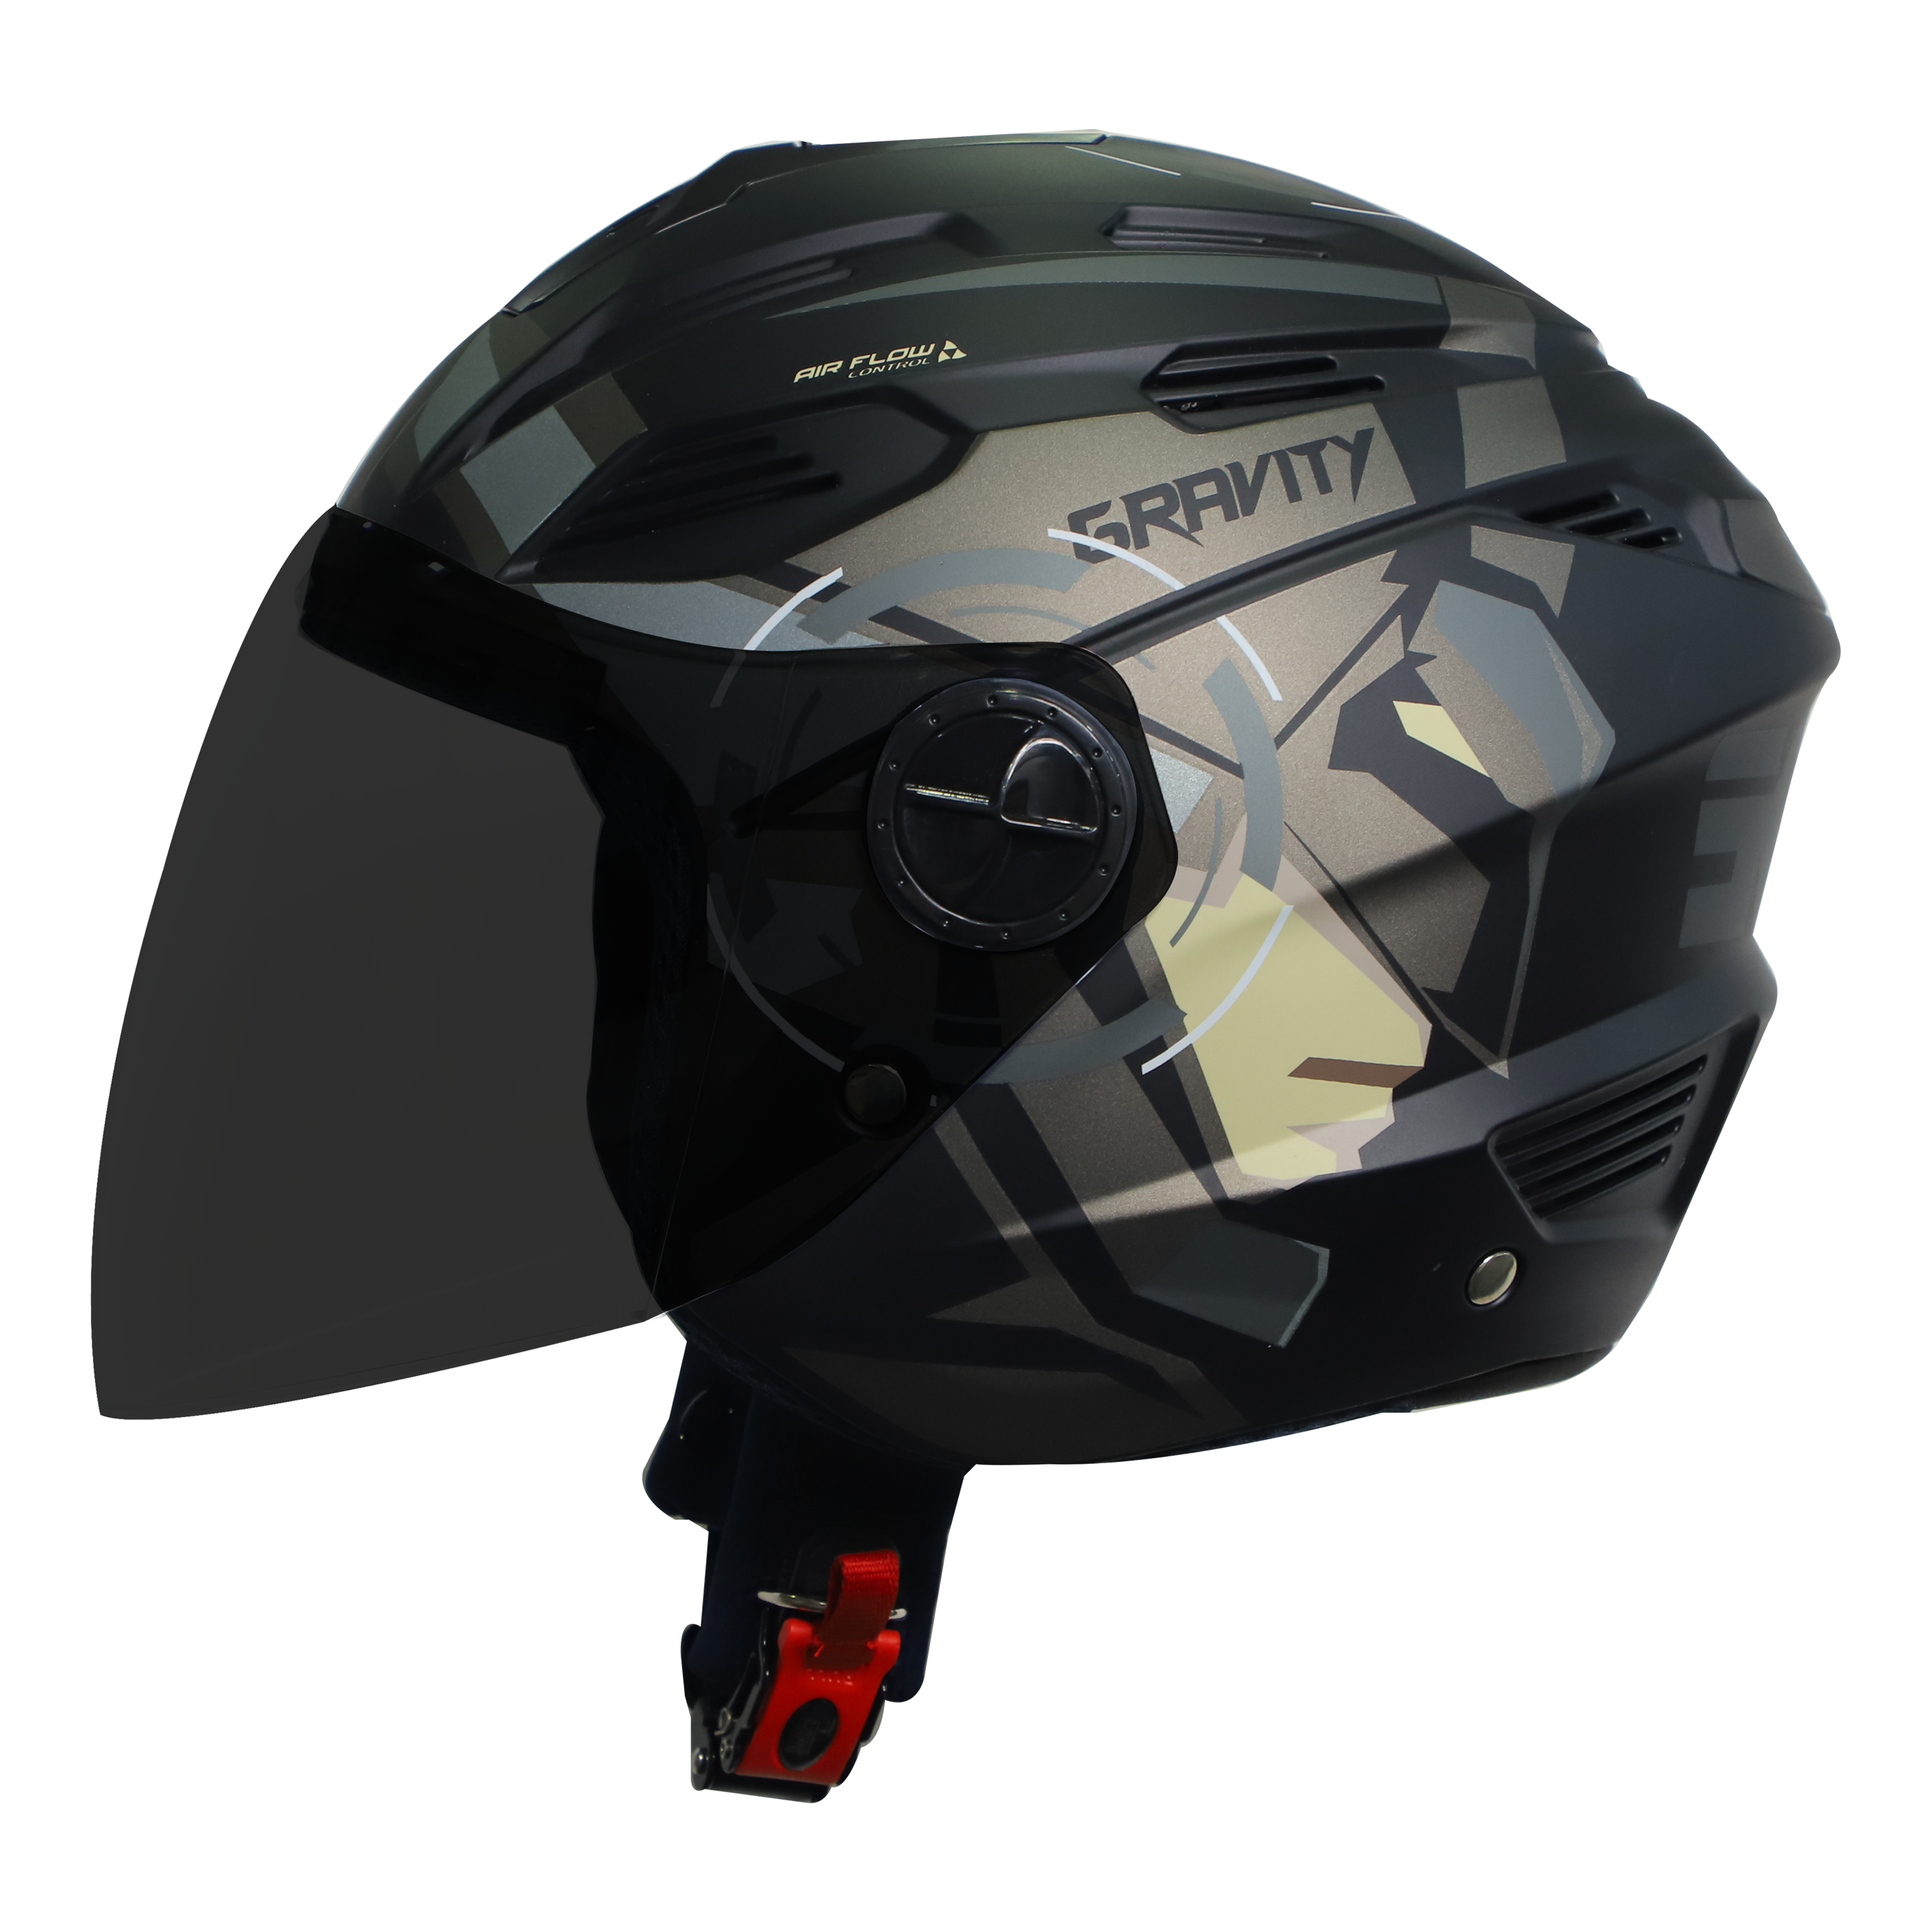 SBA-6 GRAVITY MAT BLACK WITH GREY (FITTED WITH CLEAR VISOR EXTRA SMOKE VISOR FREE)